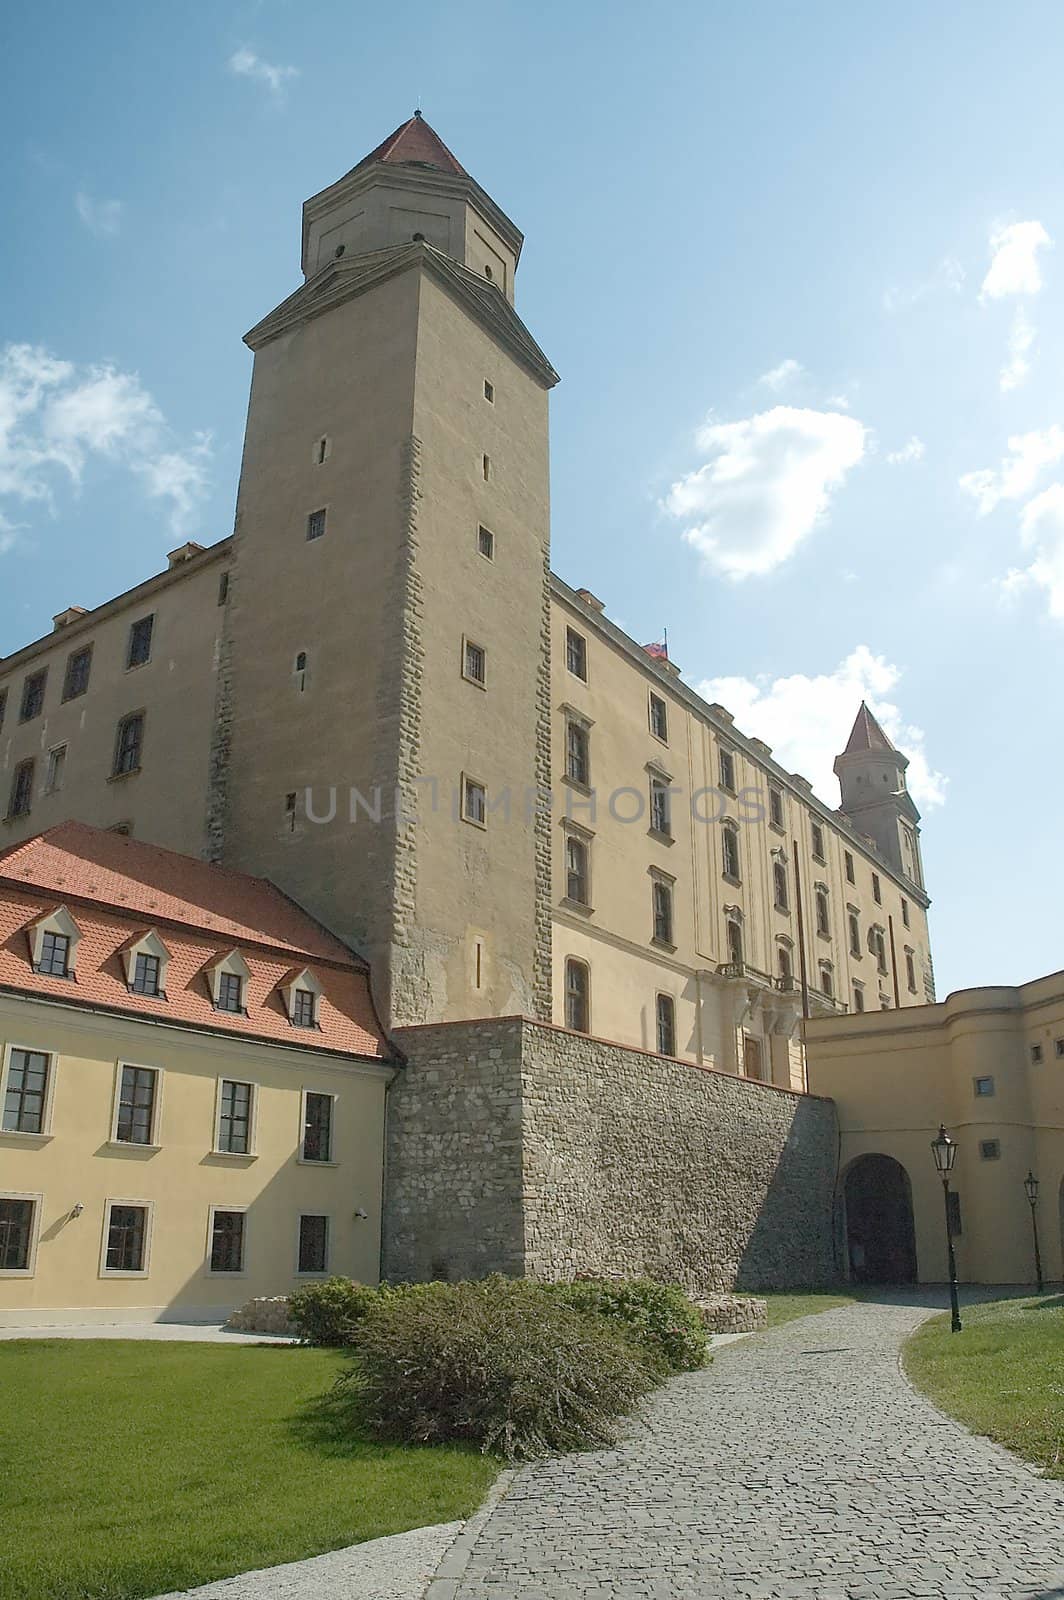 photo of bratislava castle, no people are visible, 